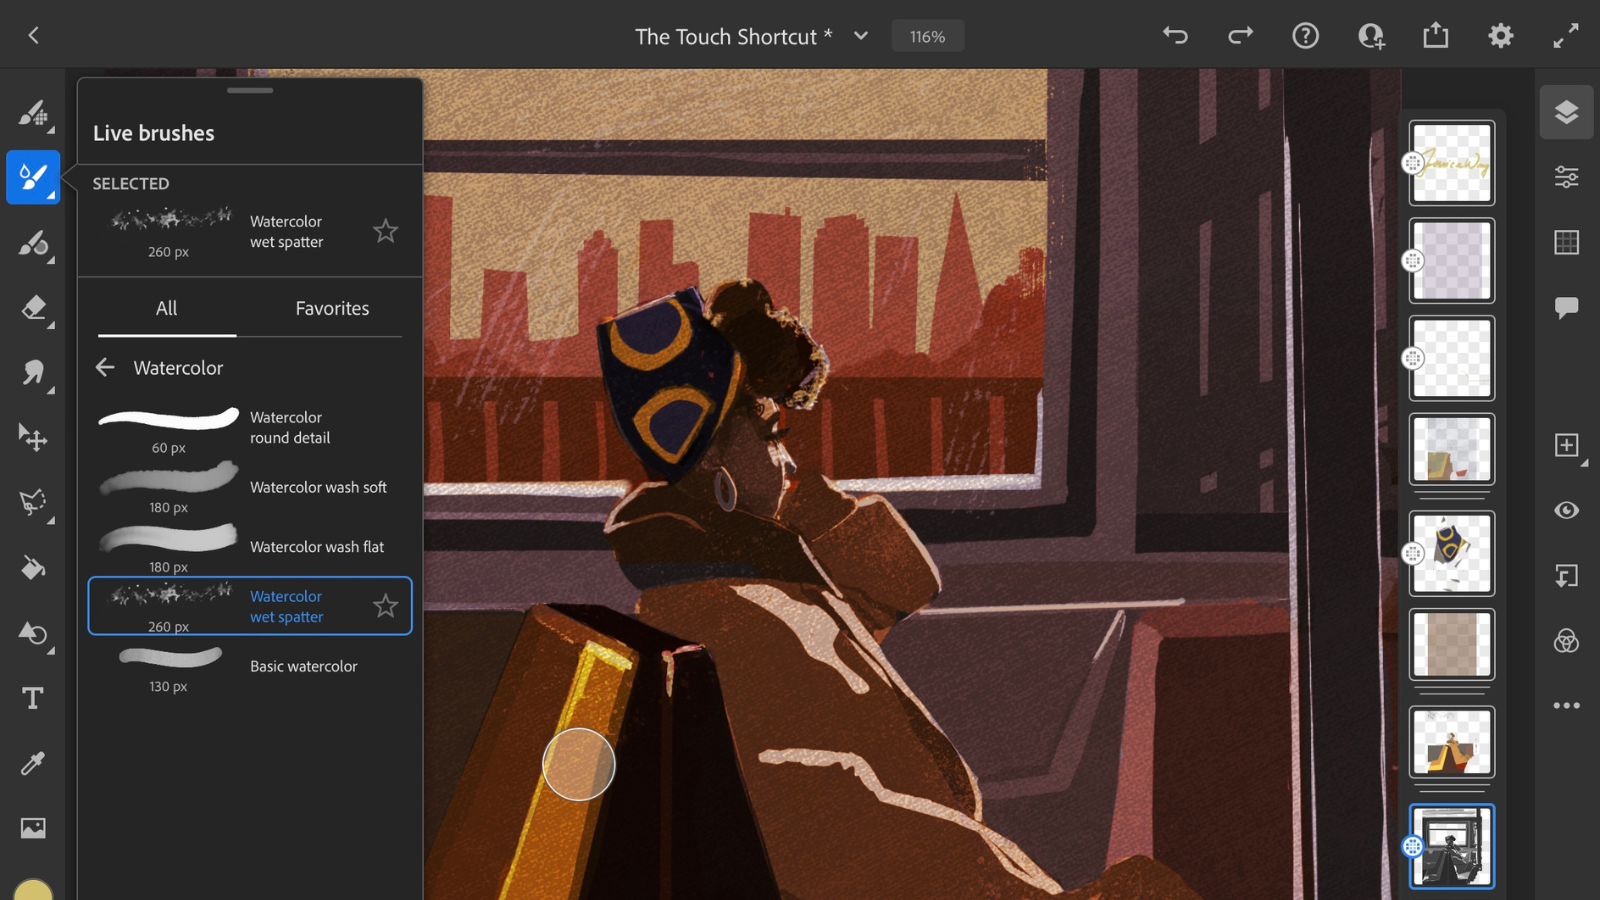 How to Make Your Own Brushes  Make it with Adobe Creative Cloud